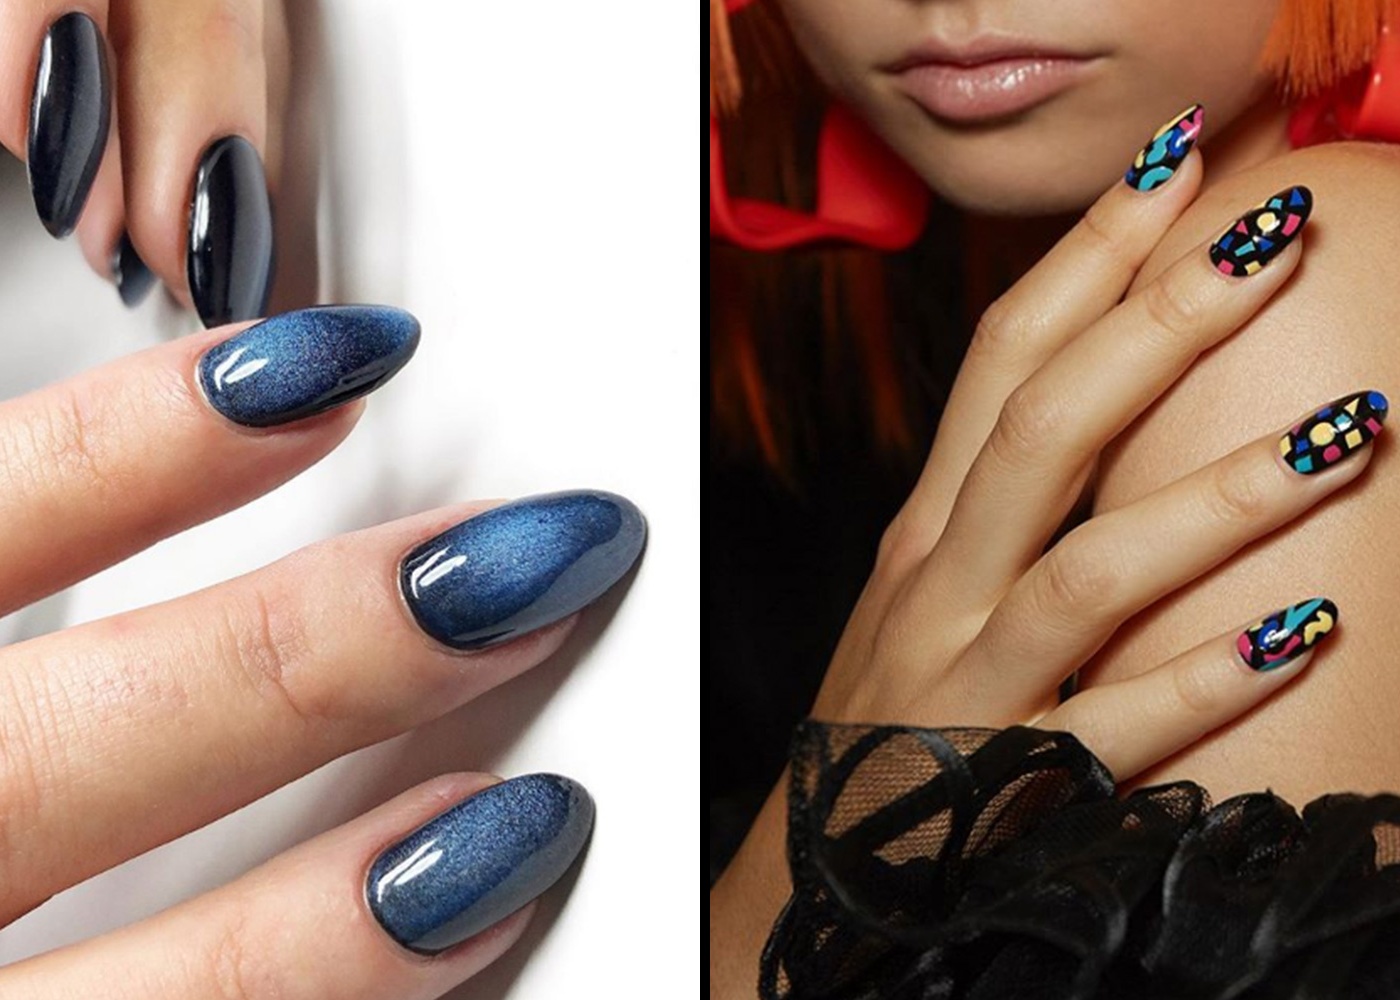 7. "Coffin Nail Art: The Hottest Nail Trend of the Year" - wide 8